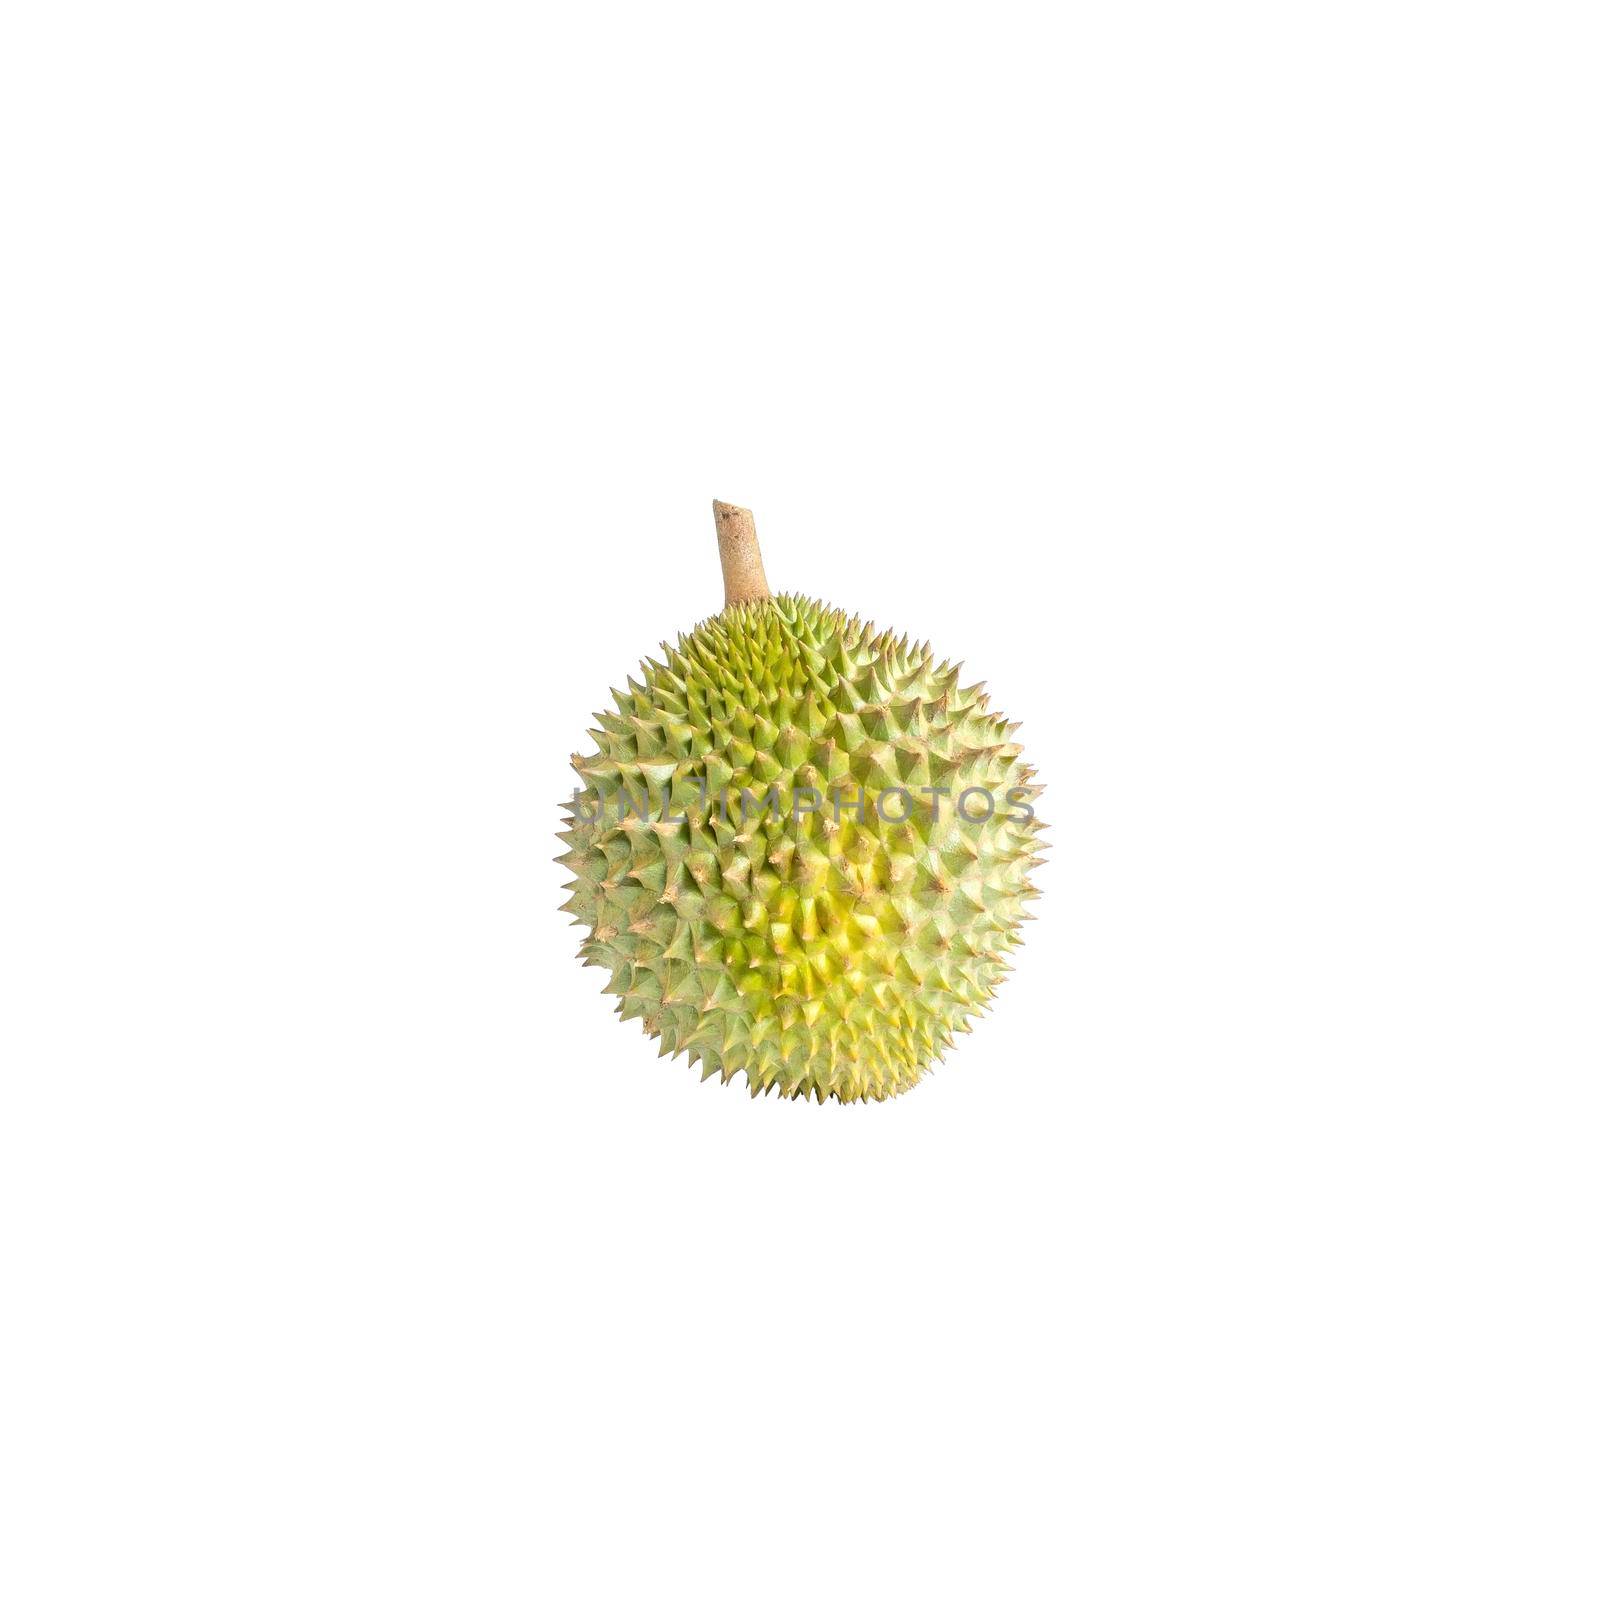 The ripe durian is ready to eat  on white background. by wattanaphob